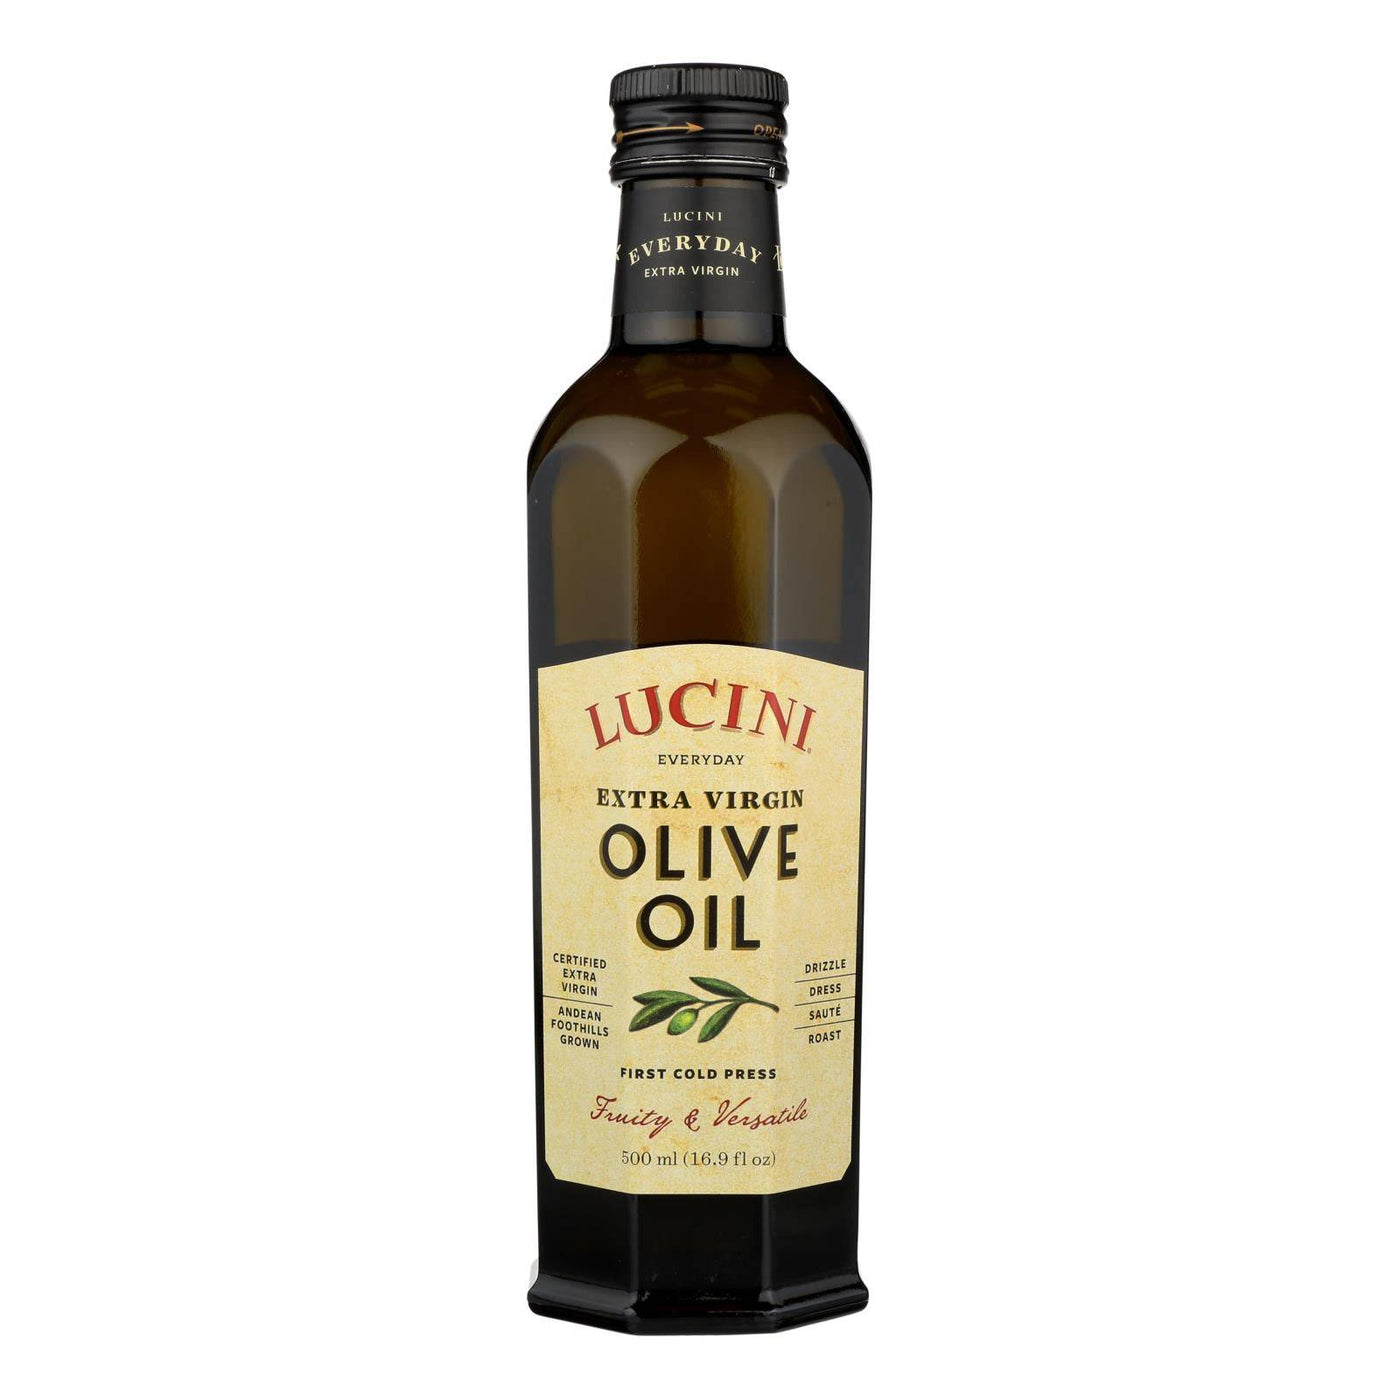 Buy Lucini Italia Select Extra Virgin Olive Oil - Case Of 6 - 17 Fl Oz.  at OnlyNaturals.us